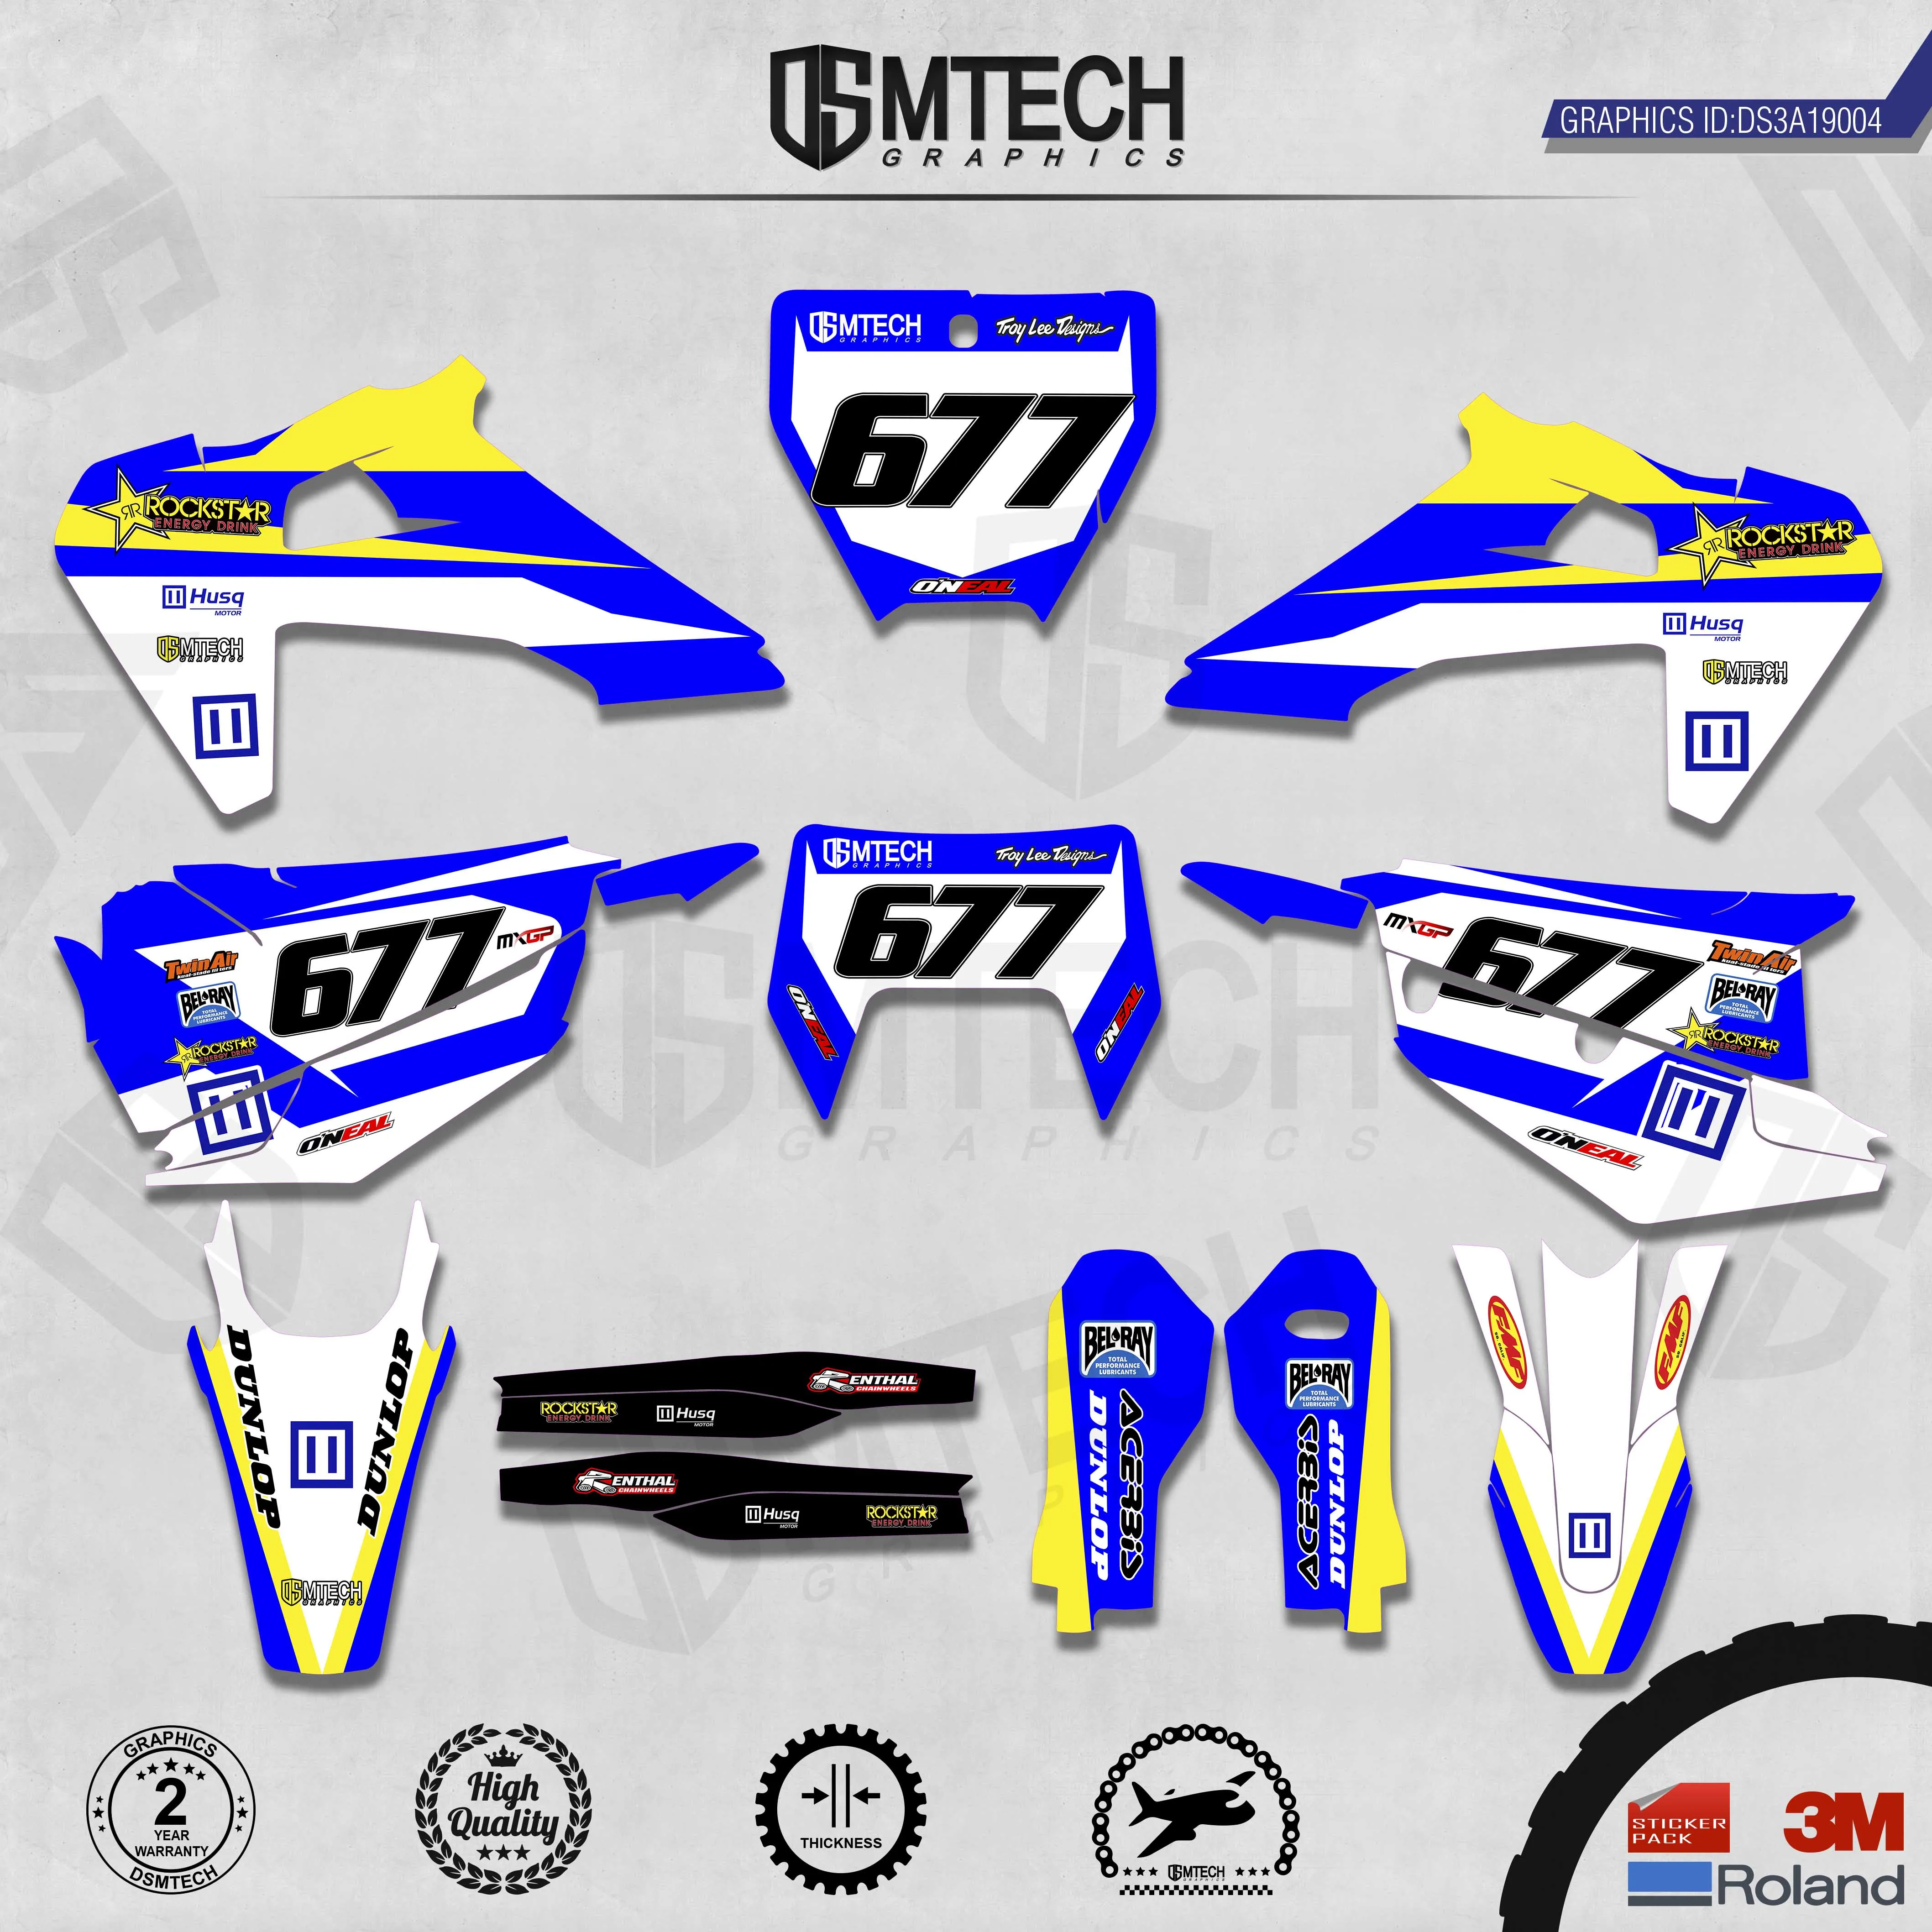 DSMTECH Customized Team Graphics Backgrounds Decals 3M Custom Stickers For TC FC TX FX FS 2019-2021 TE FE 2020-2022 004